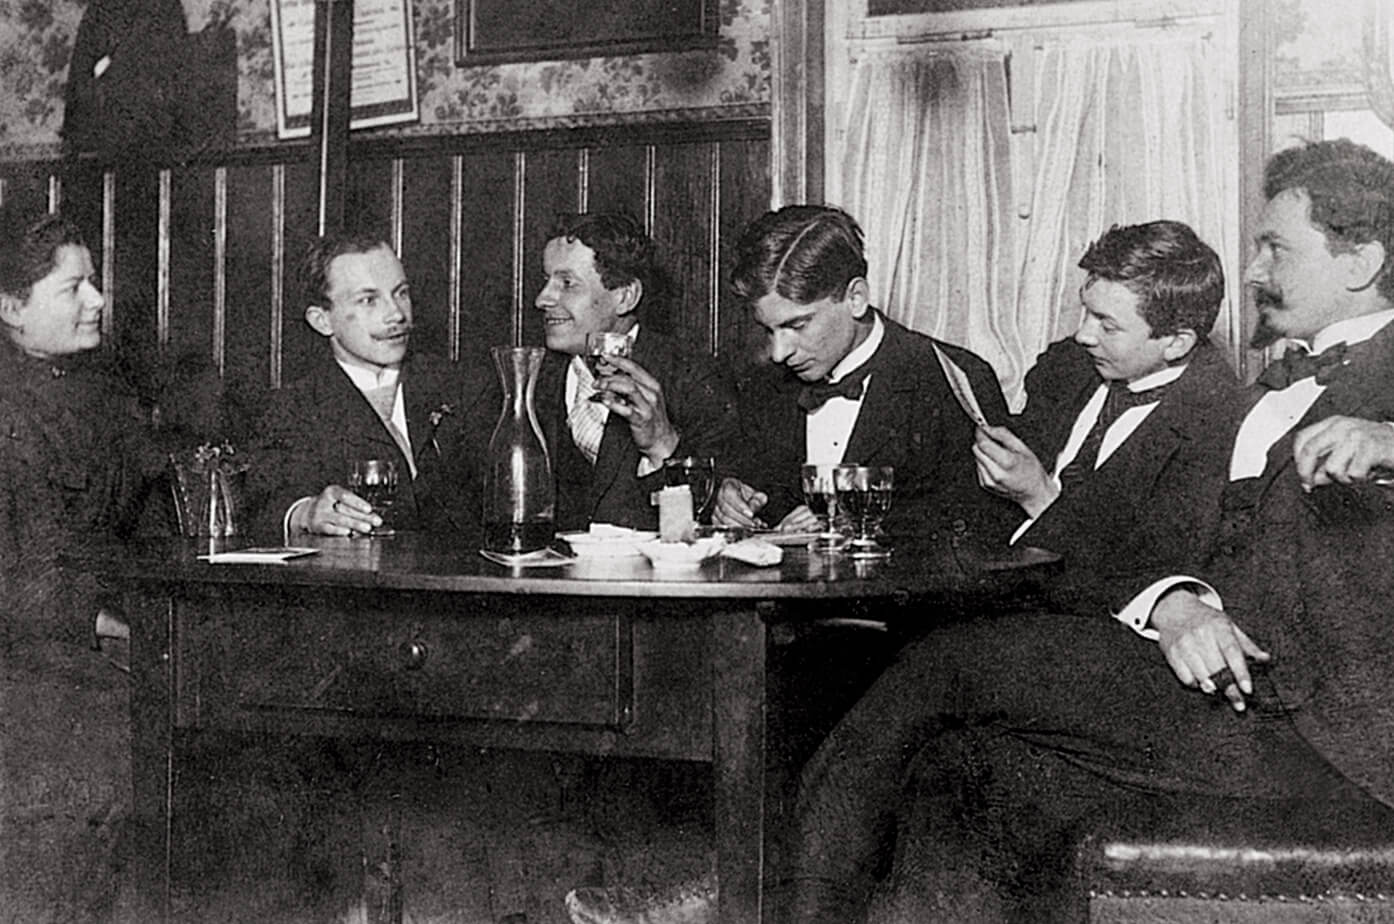 Mechanical engineering students Karl Kessler (2nd from right) and Karl Maybach Gasthaus (3rd from right) in an inn